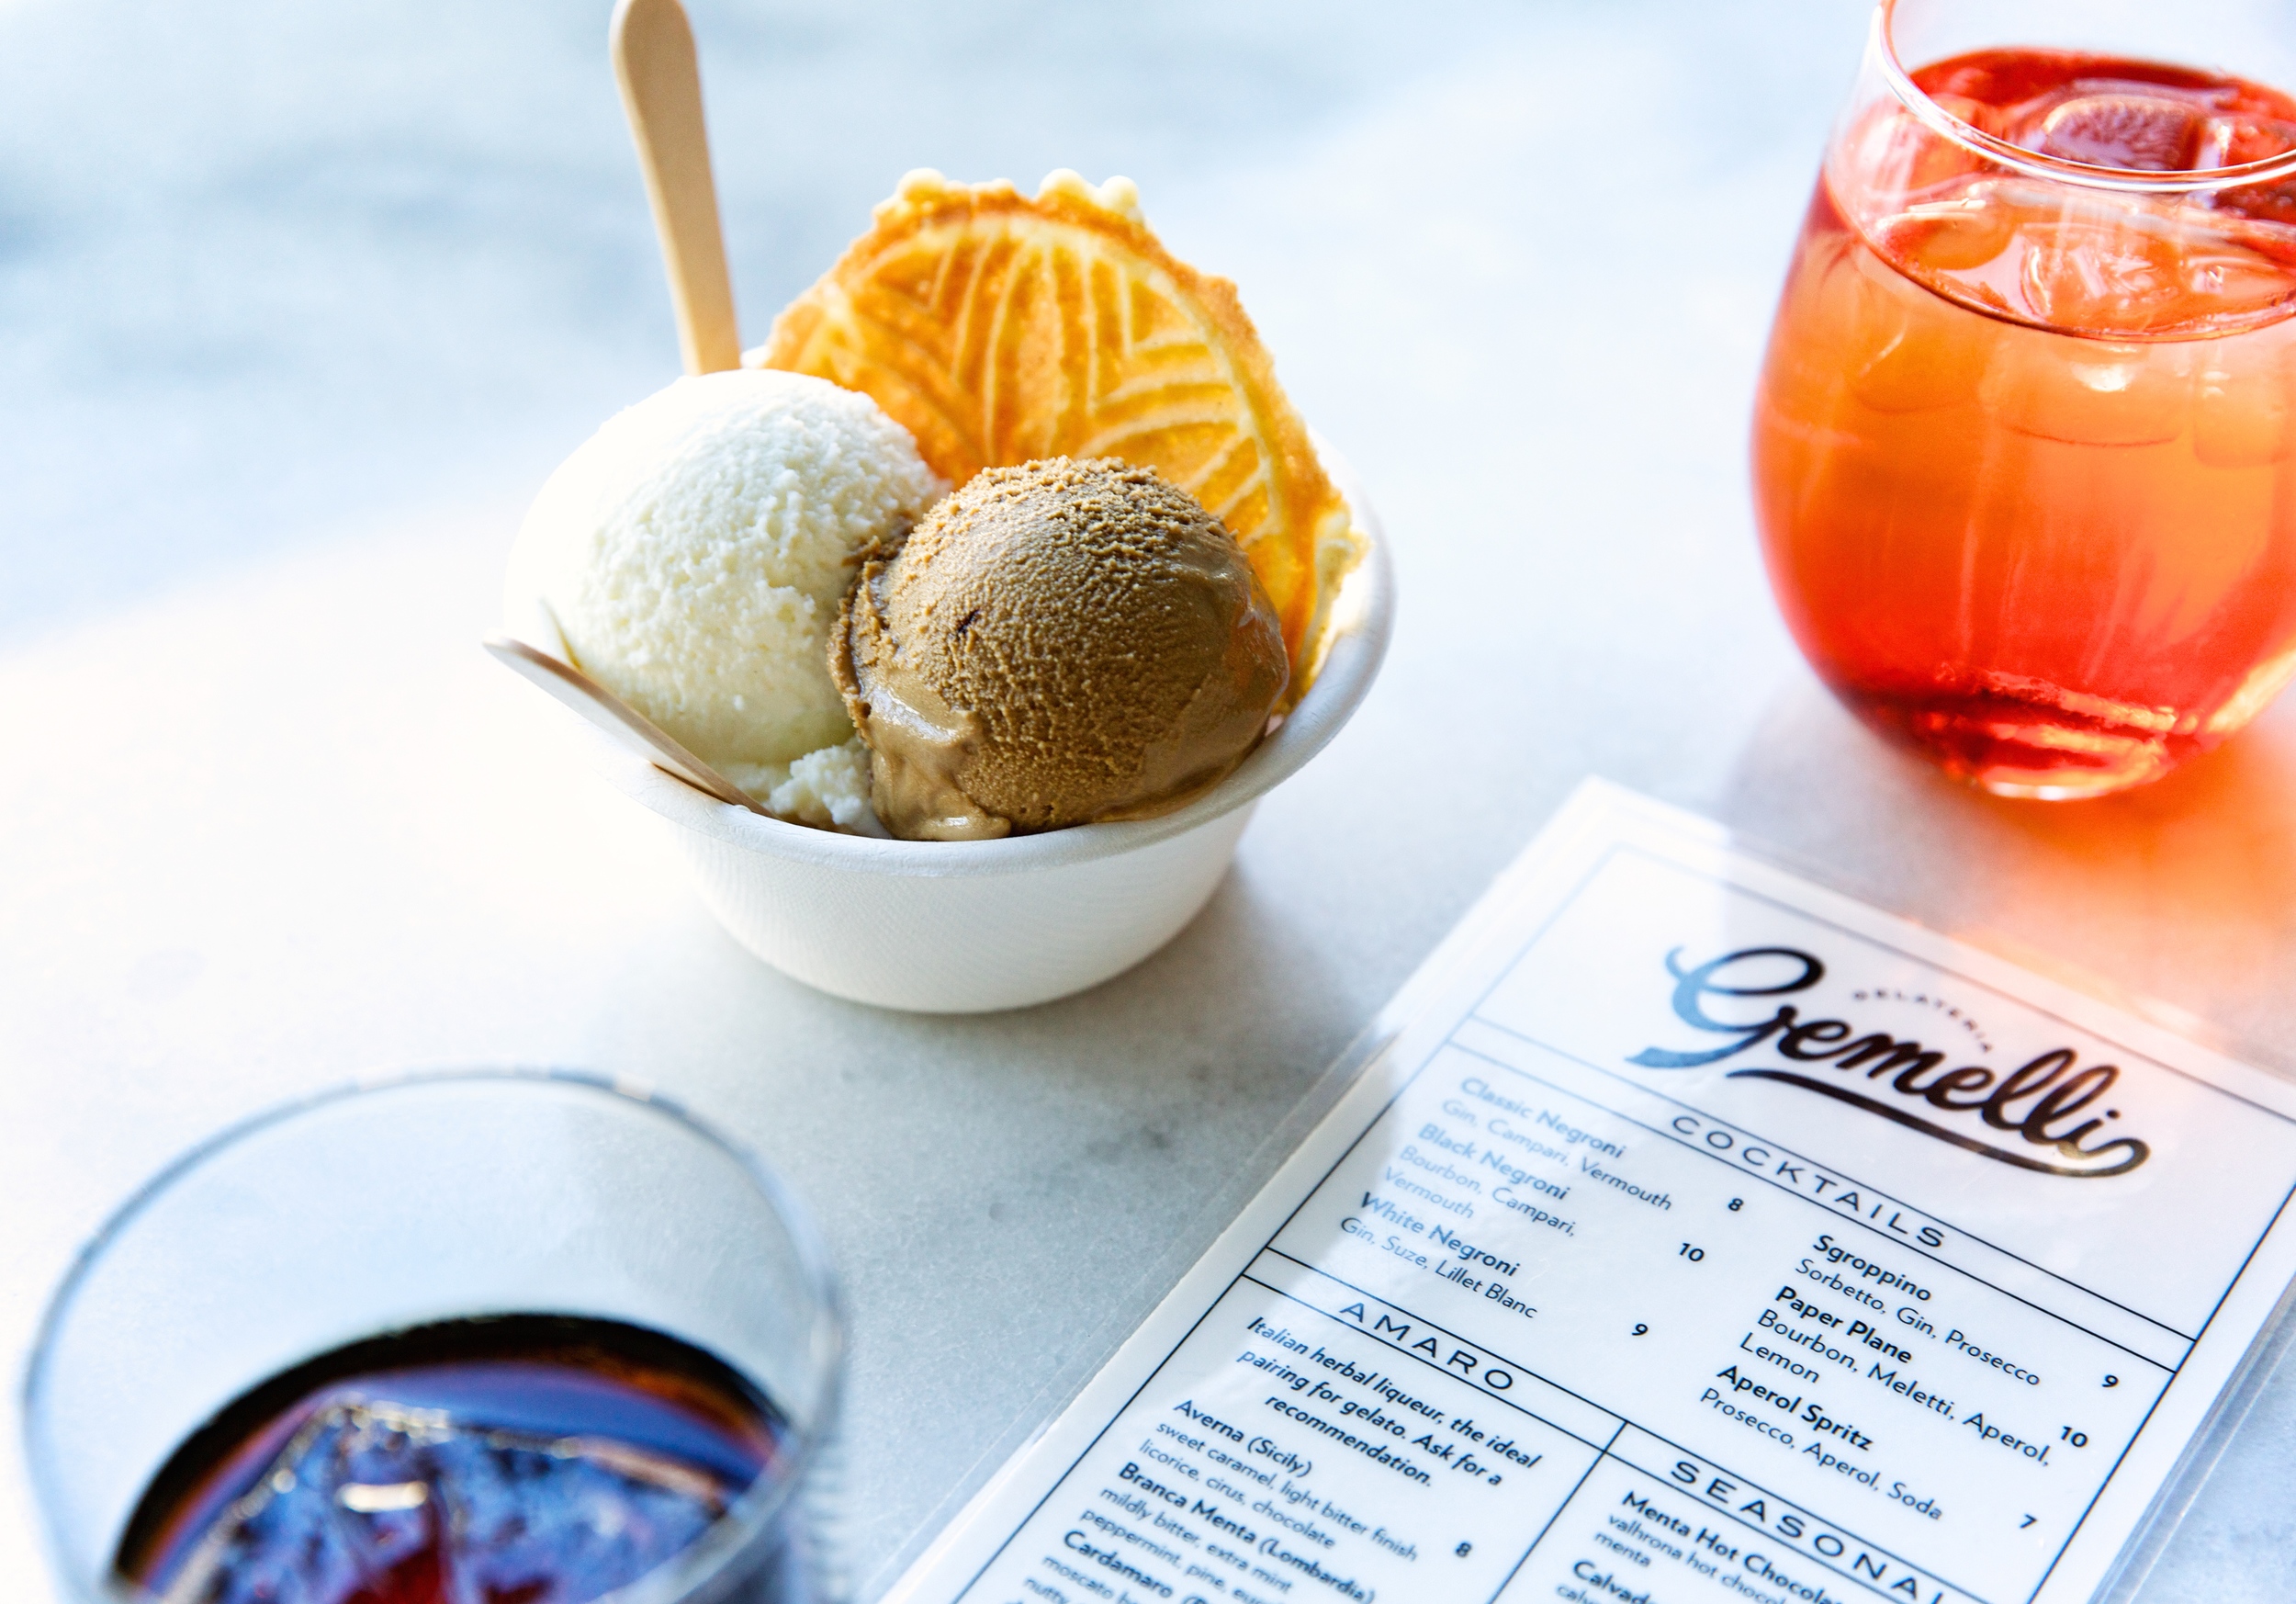 A small bowl of a vanilla and chocolate ice cream scoops with a cookie next to an orange cocktail.